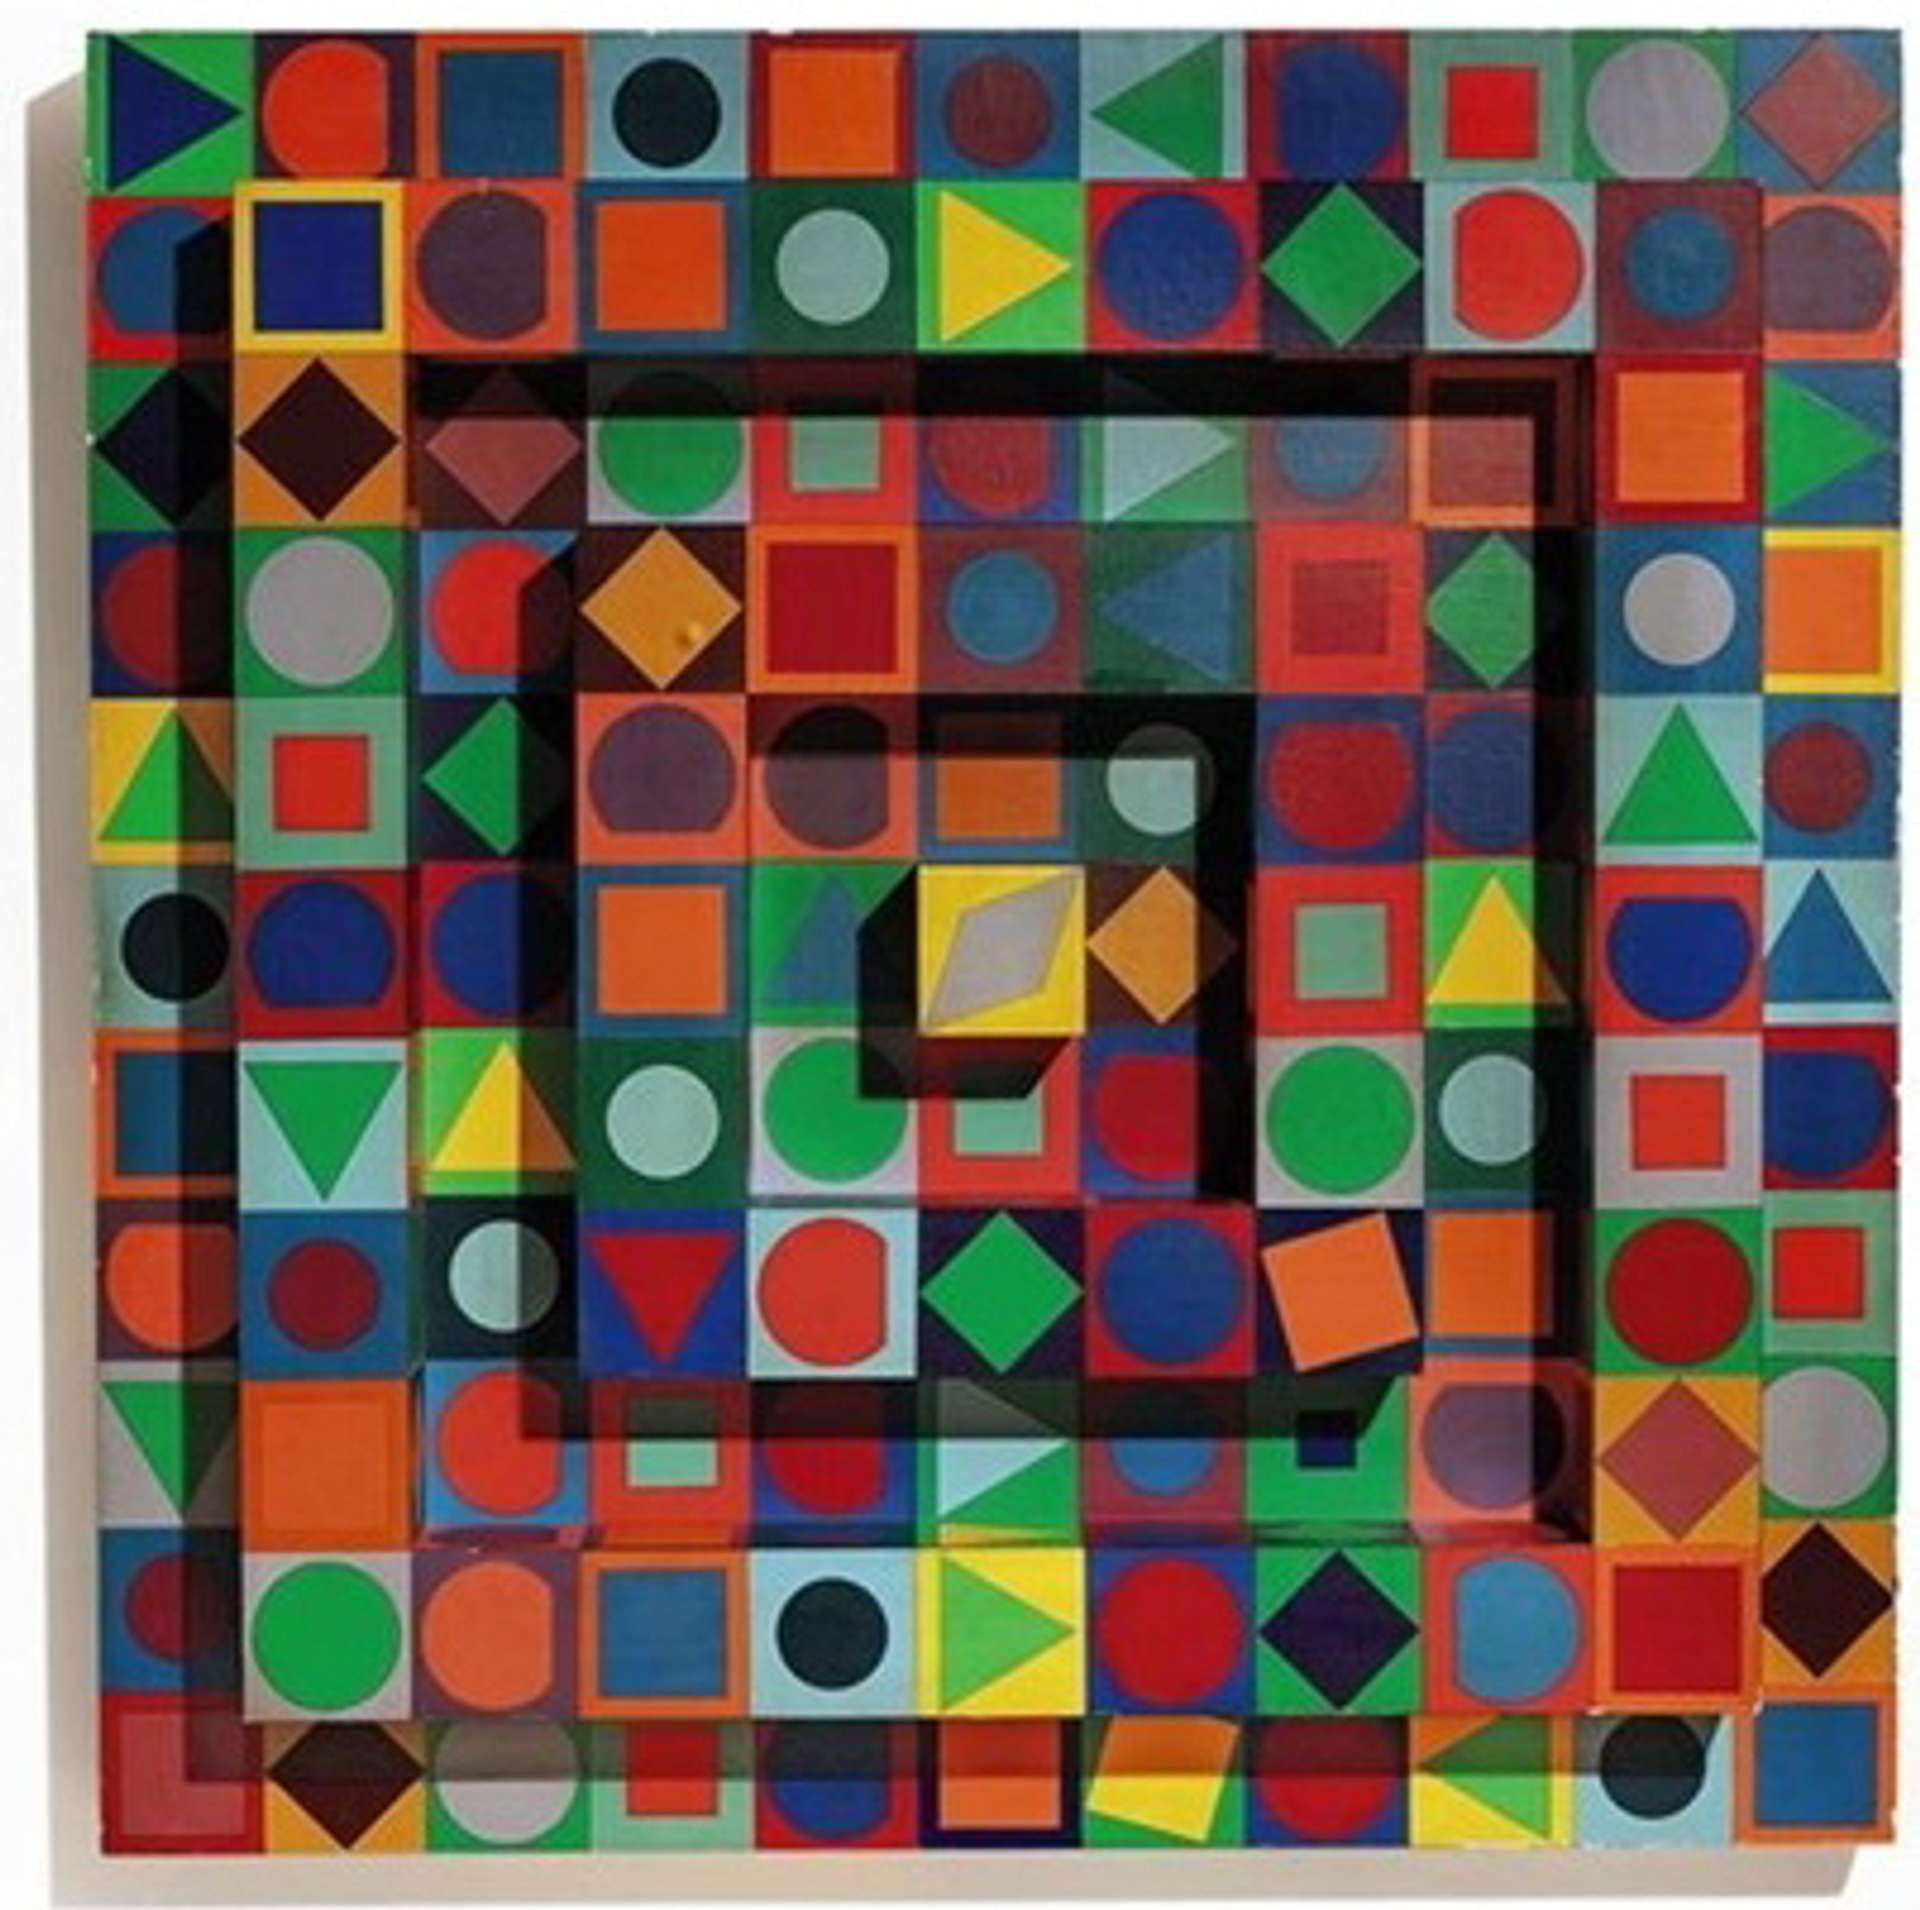 An artwork named "Planetary Folklore" by Victor Vasarely, portraying a balanced composition of mathematical forms and designs in various hues like red, yellow, blue, and green.